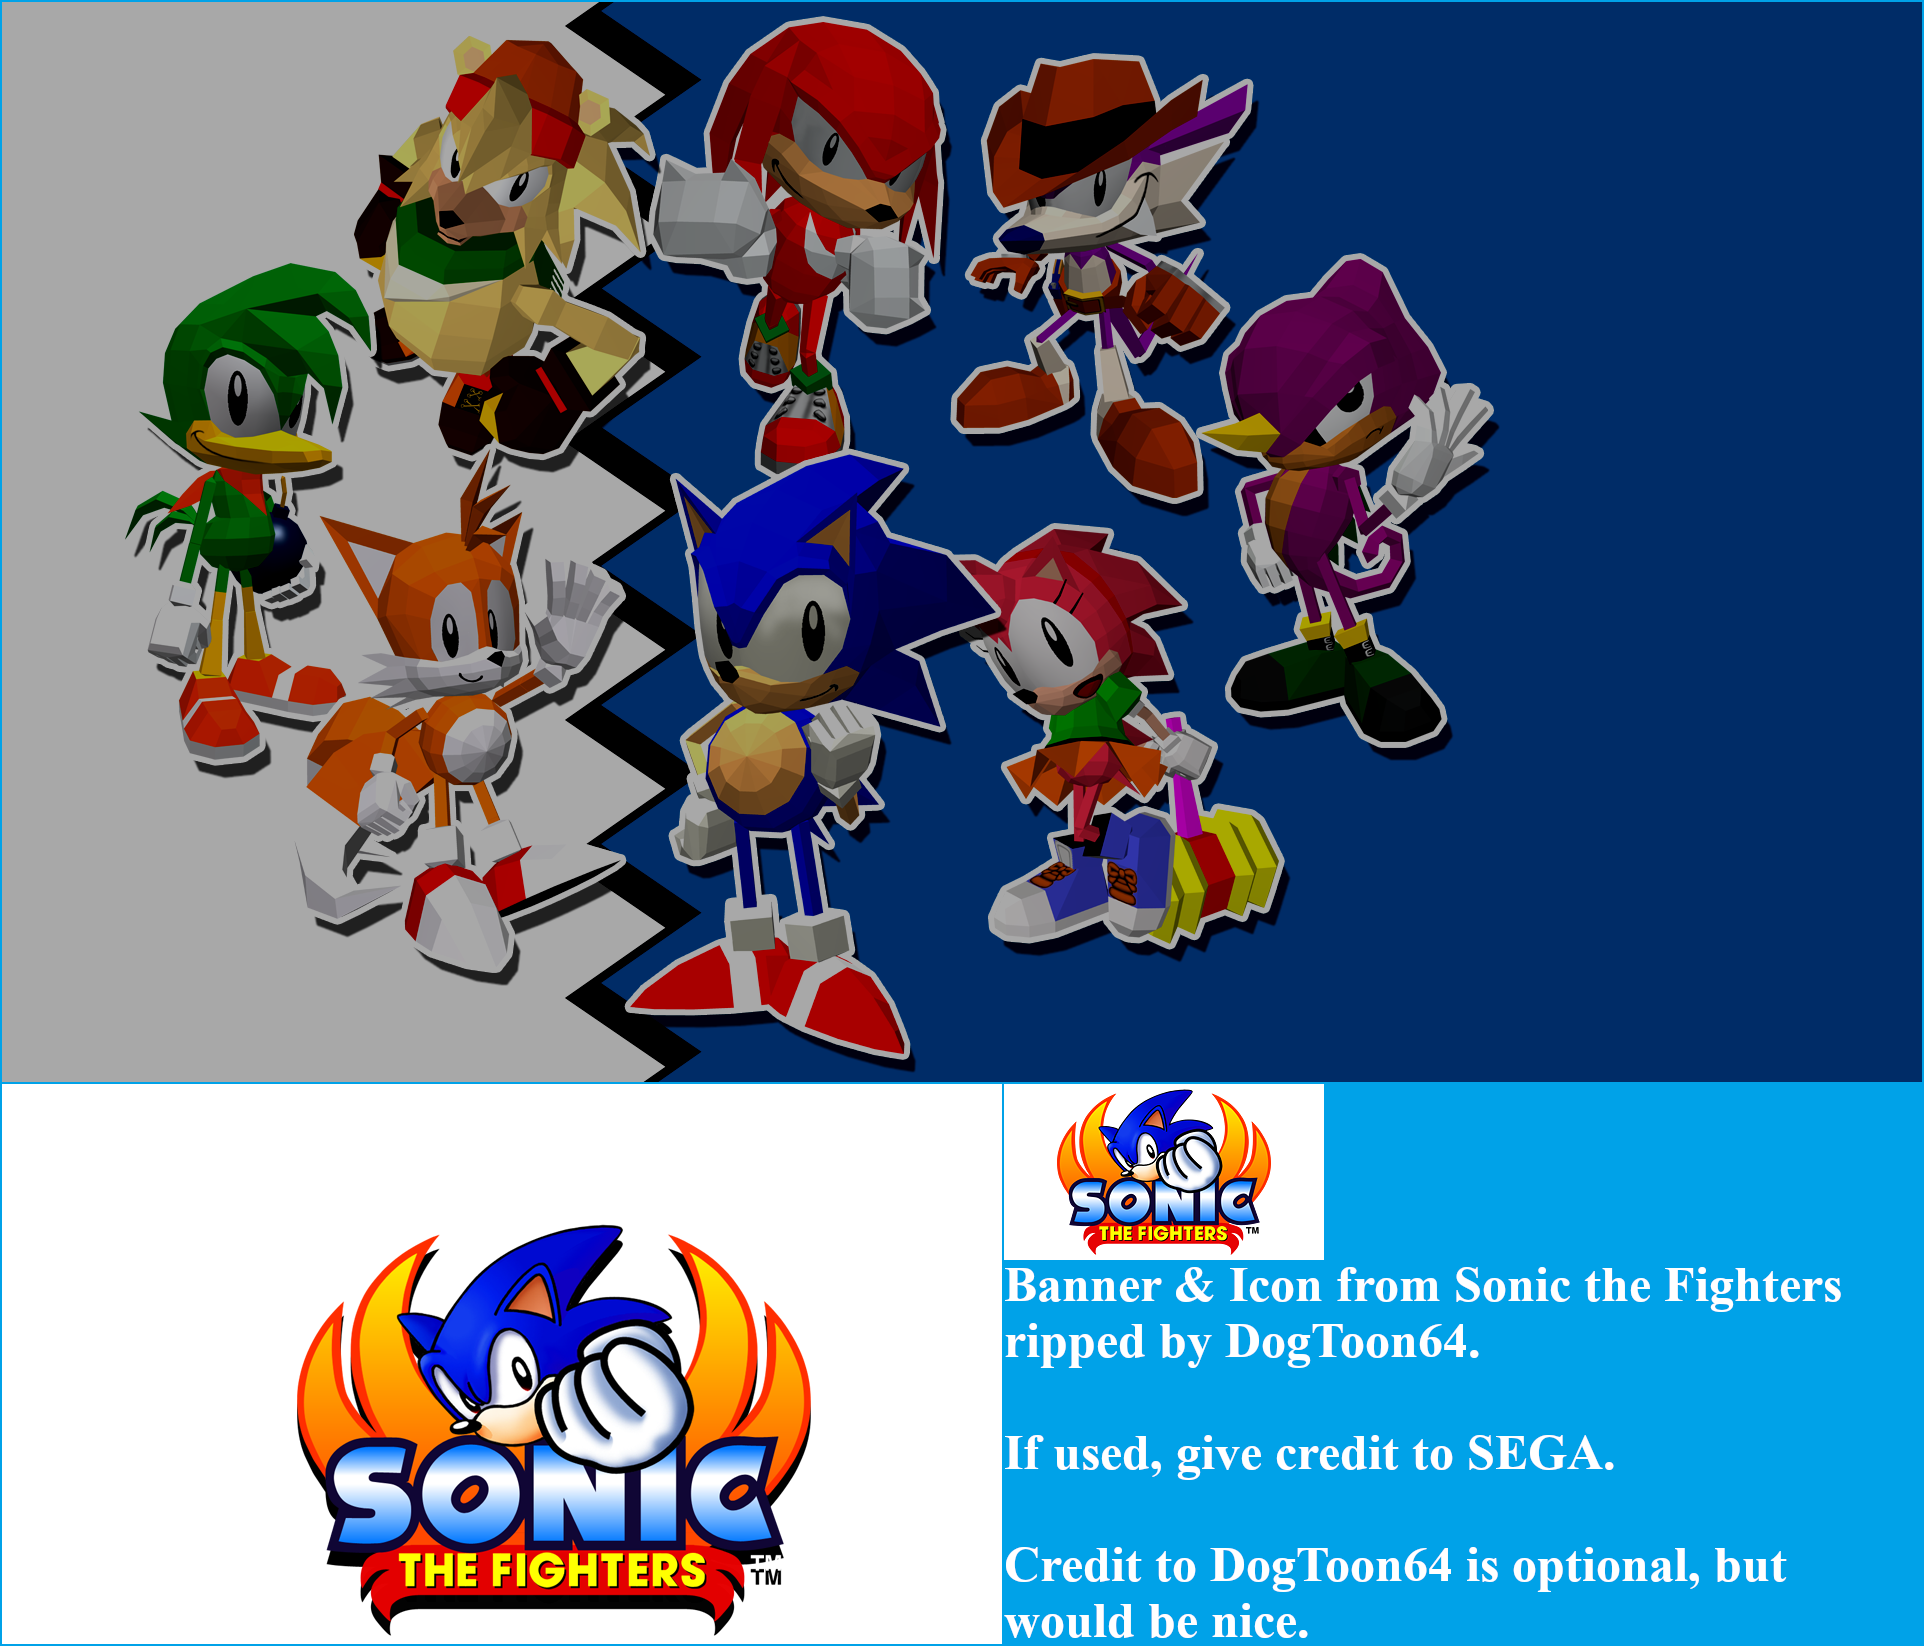 Sonic the Fighters - Banner & Icon